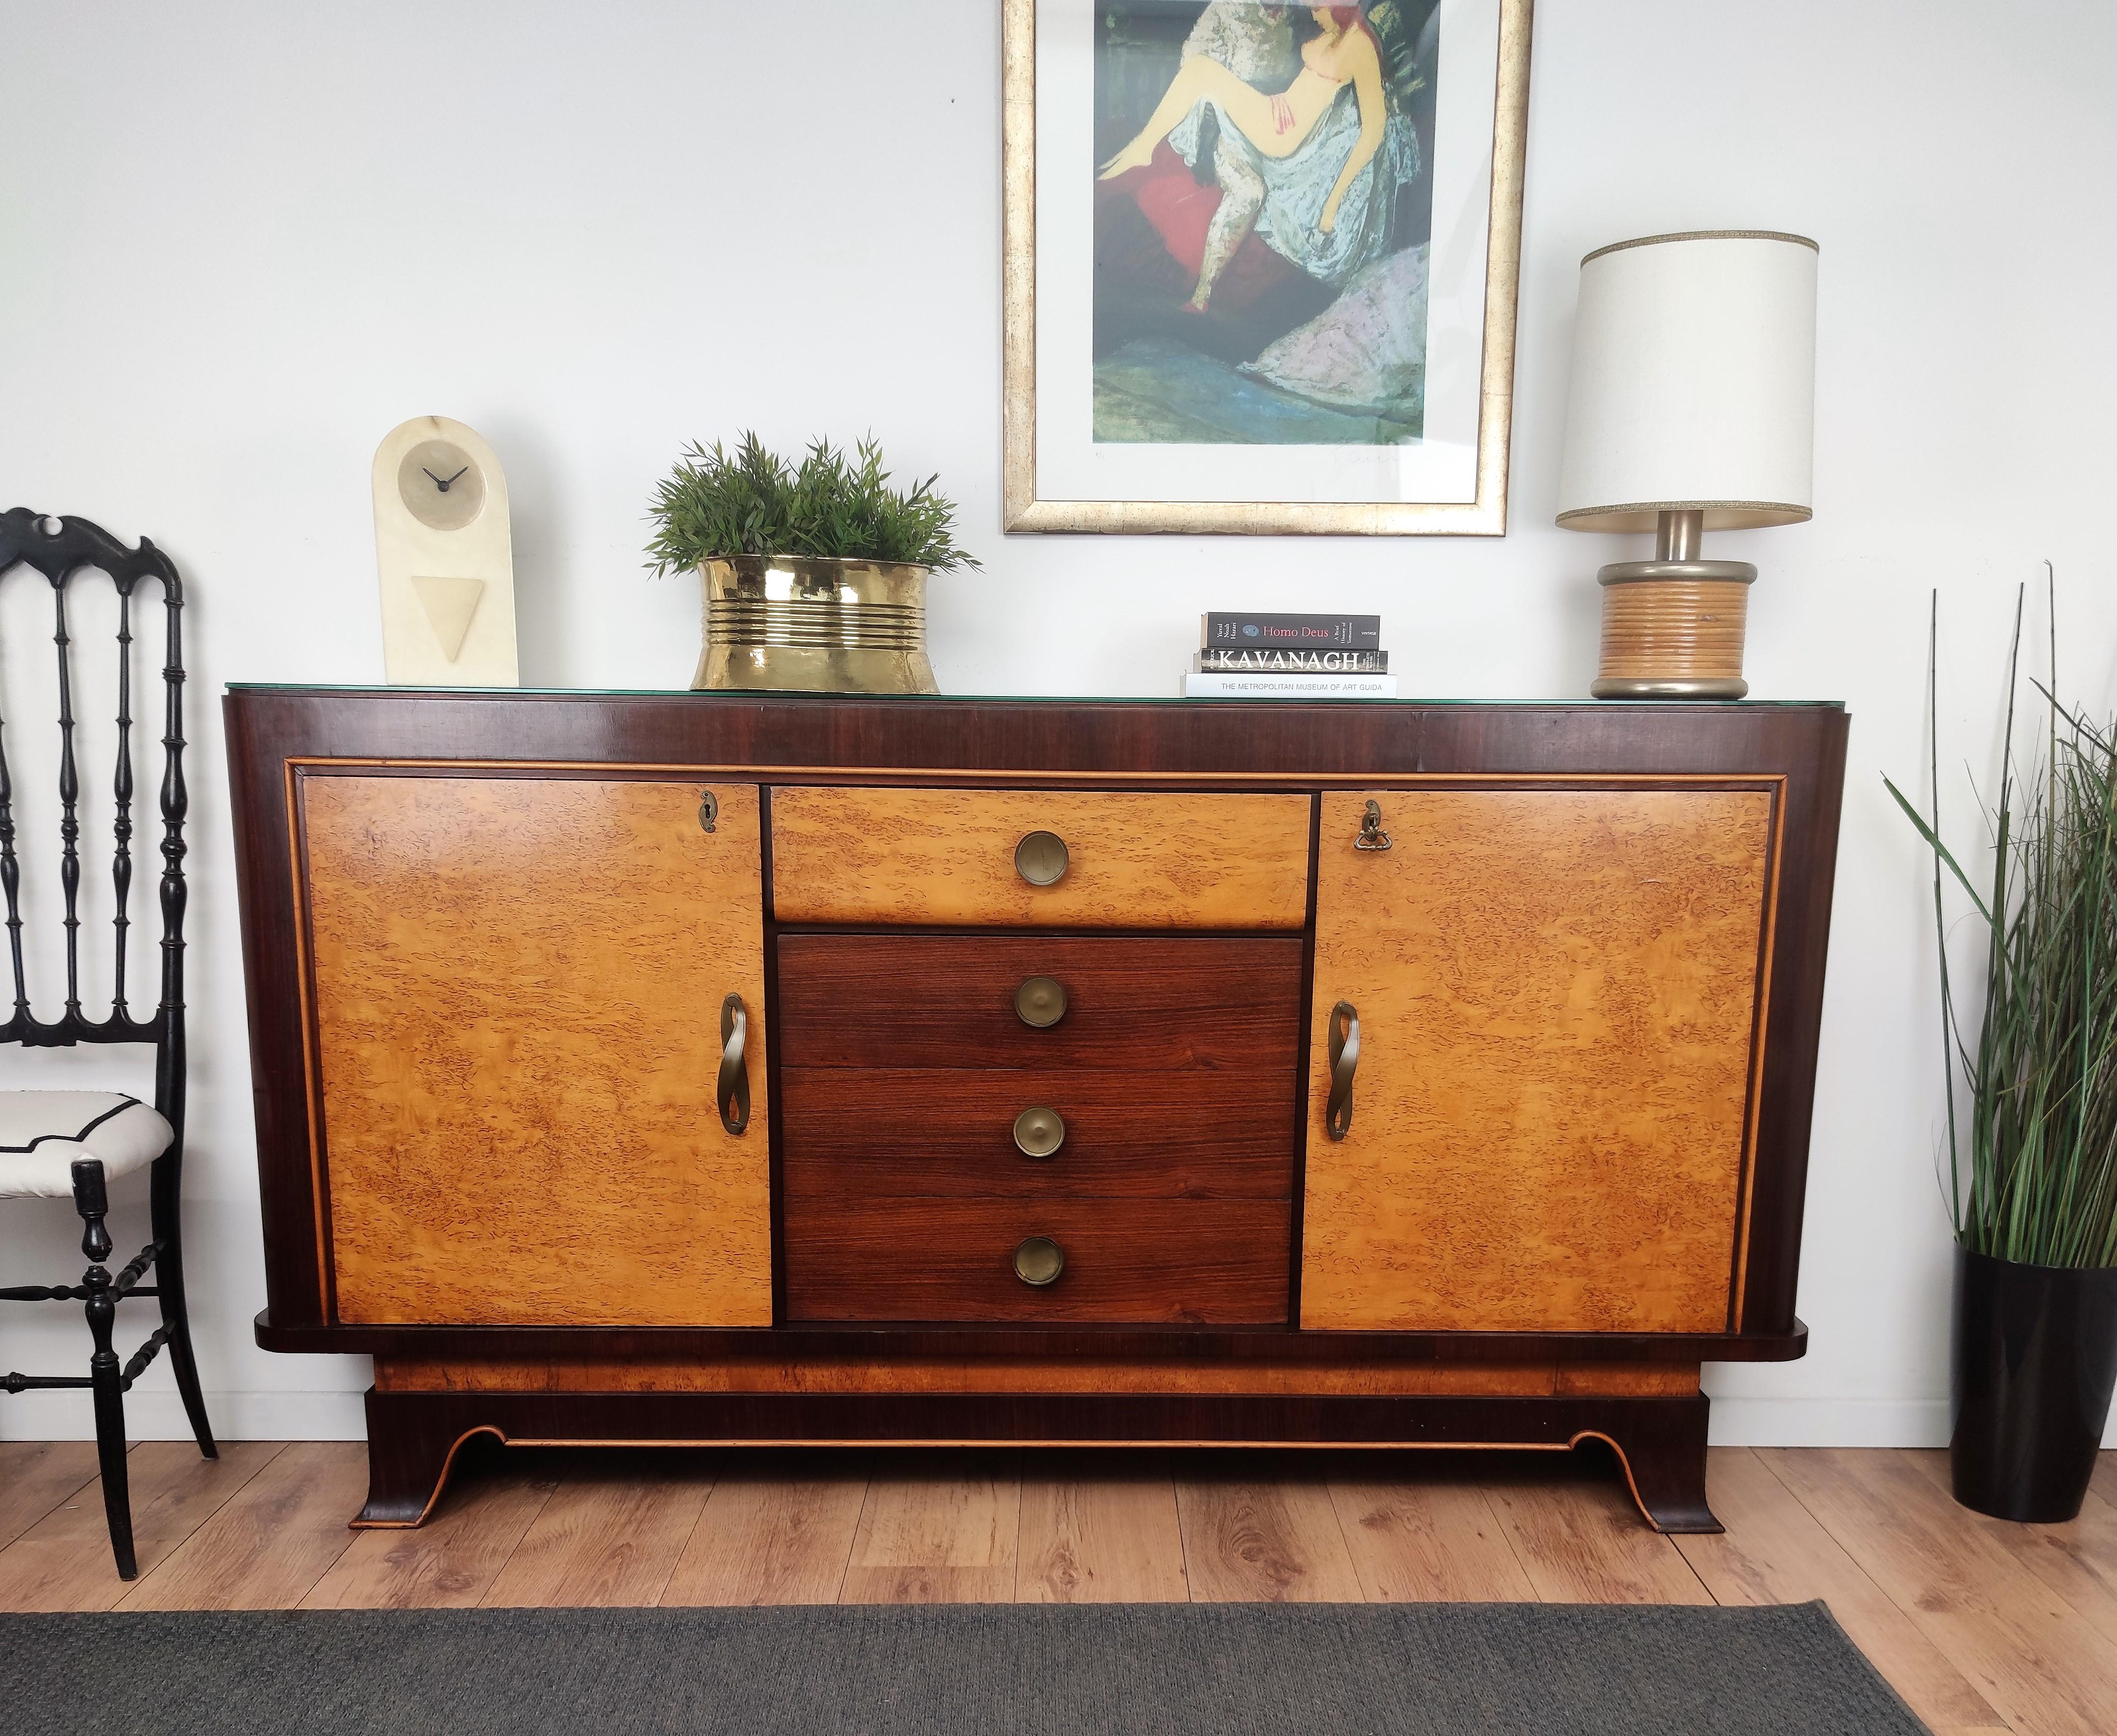 Very elegant Italian Art Deco Mid-Century Modern thin sideboard credenza or console, in beautiful veneer walnut briar burl wood, four central drawers and two side doors with shelves and great brass details, handles and keylock with black glass top.